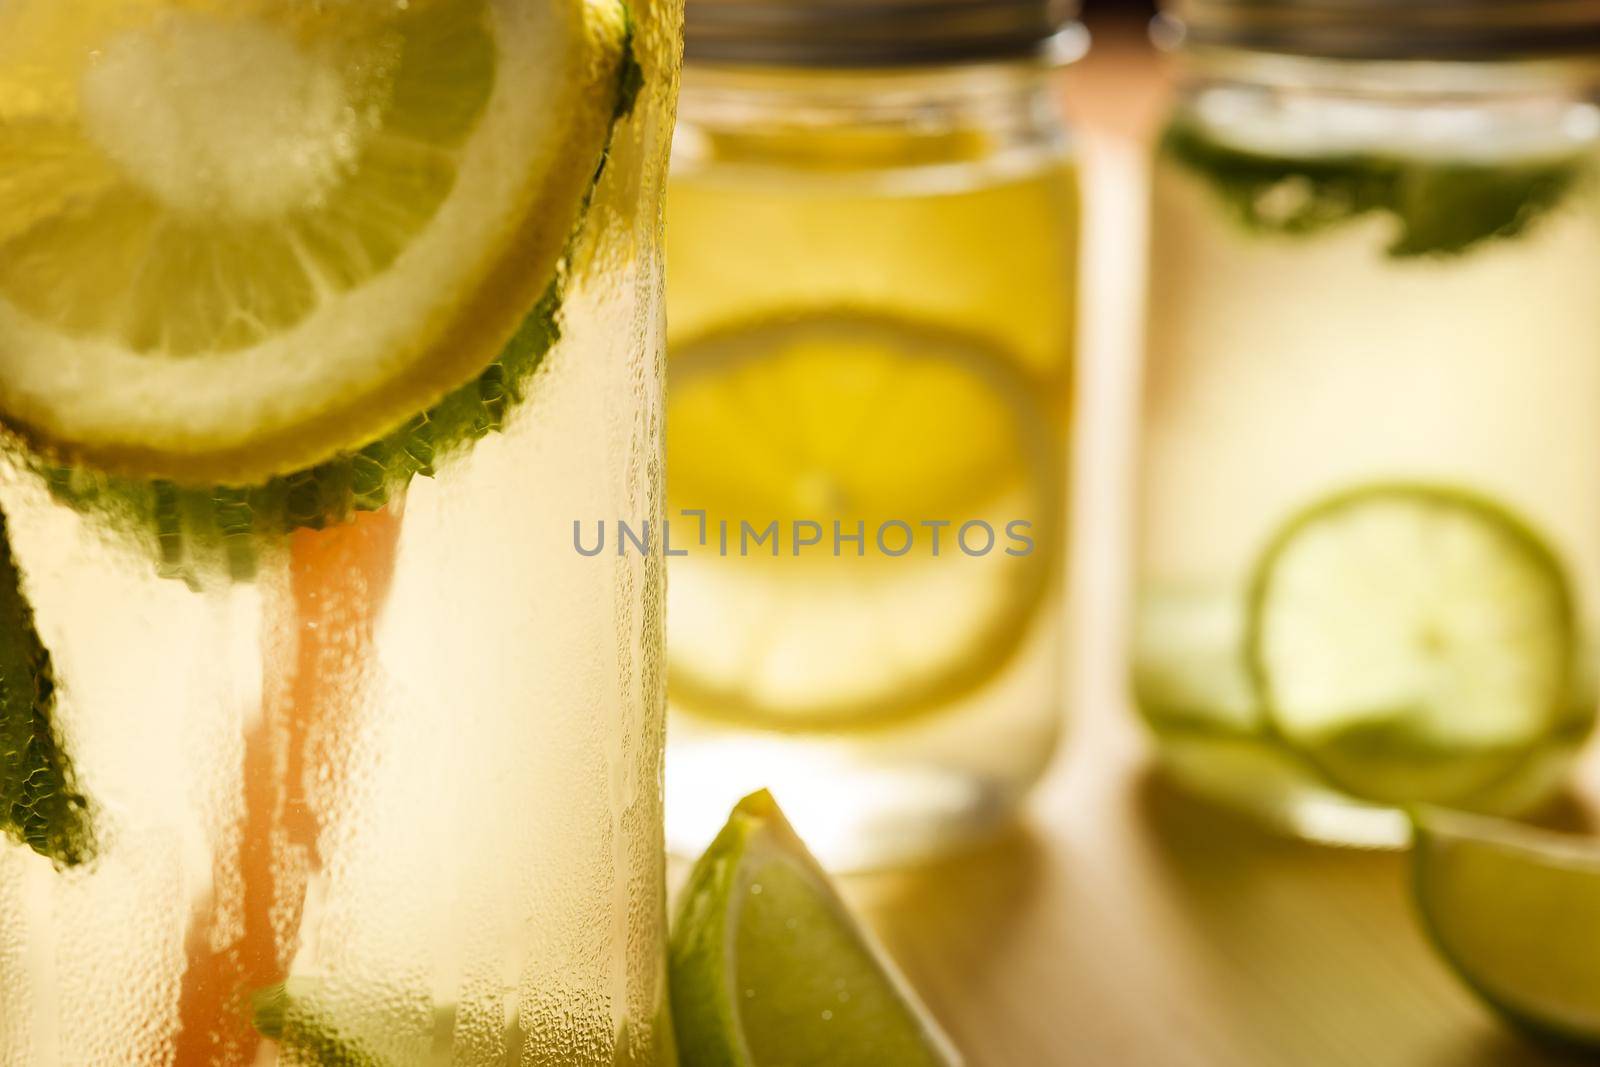 close-up of an iced lemonade with an unfocused background of two glass jars with lid on a wooden table, the jars contains homemade lime and lemon sodas